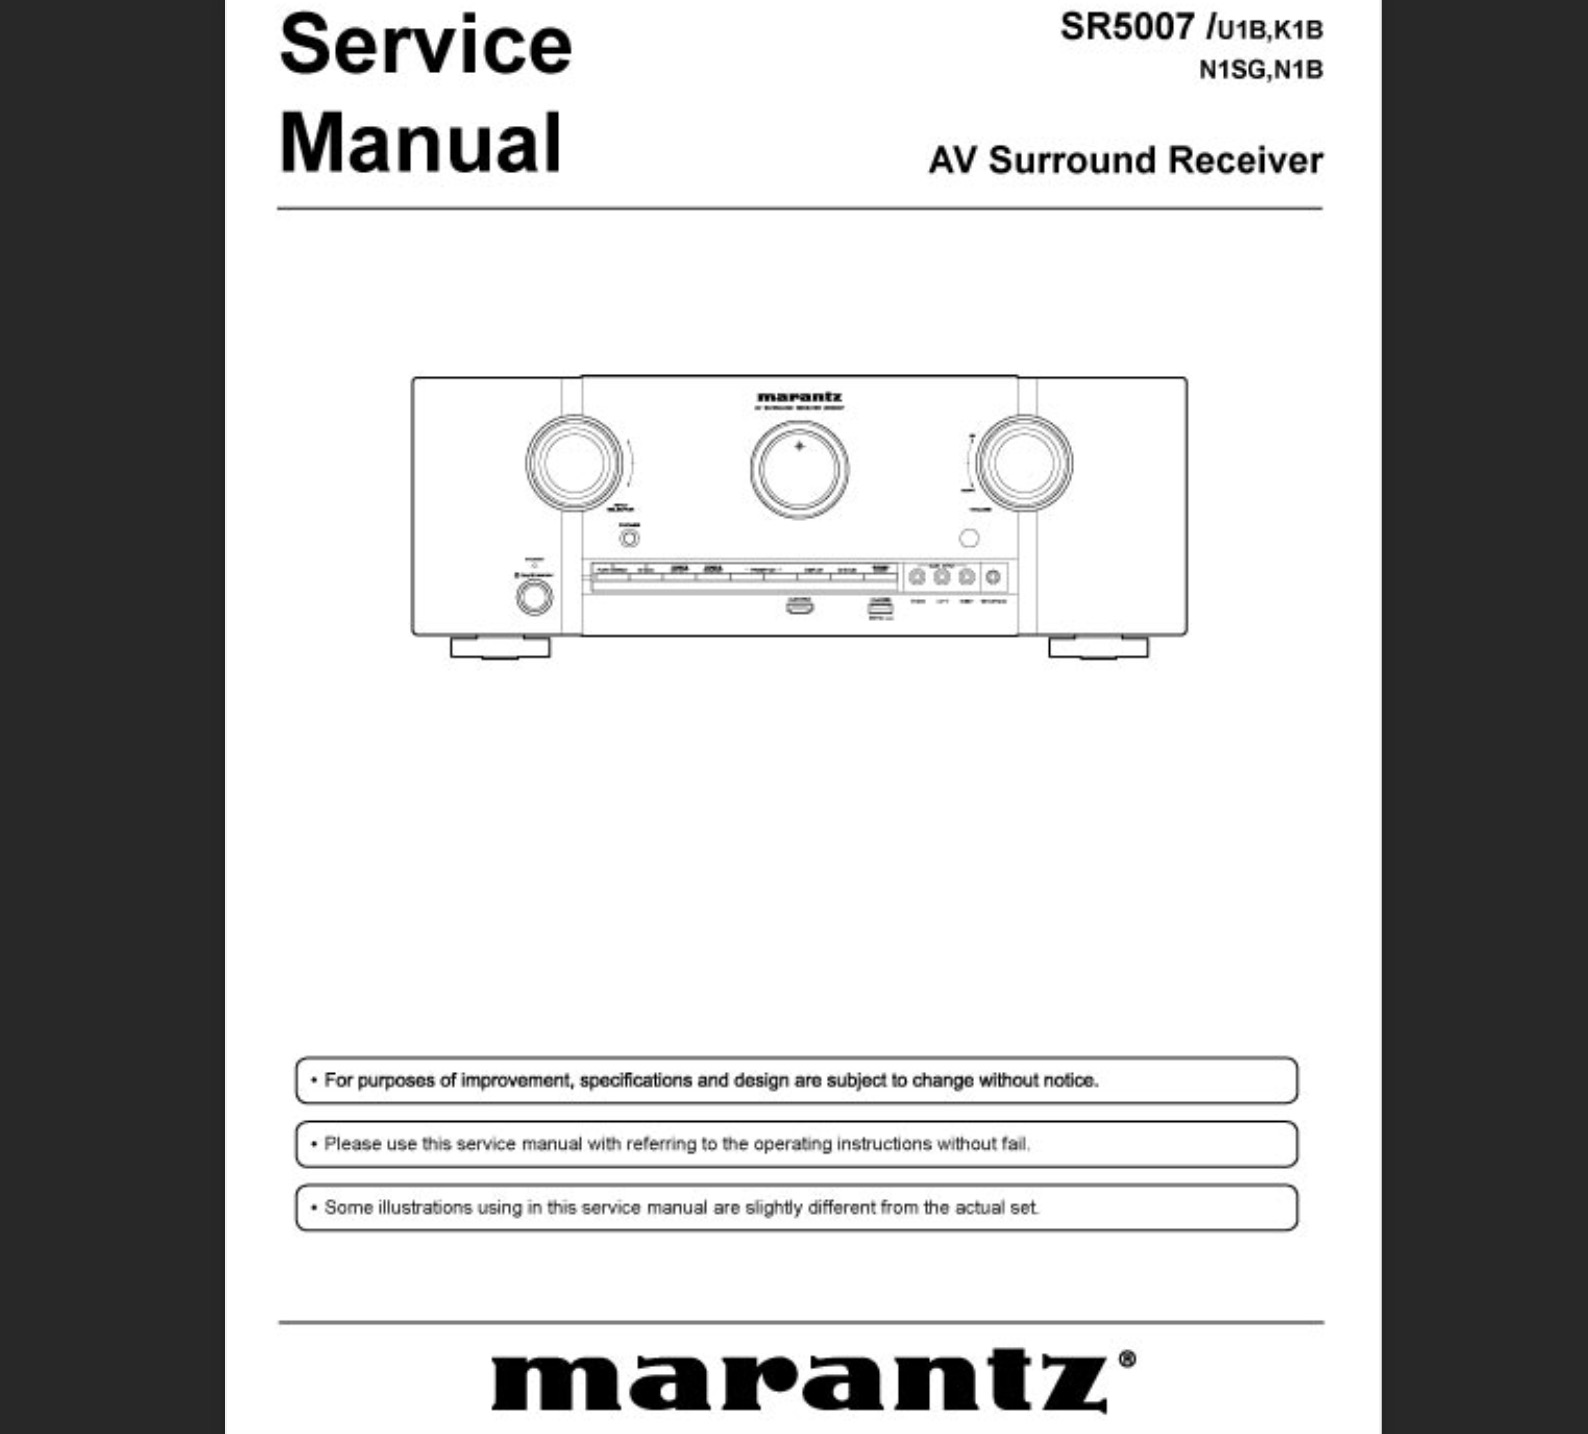 Marantz SR5007 AV Surround Receiver Service Manual, Parts List, Exploded View, Wiring and Schematic Diagram